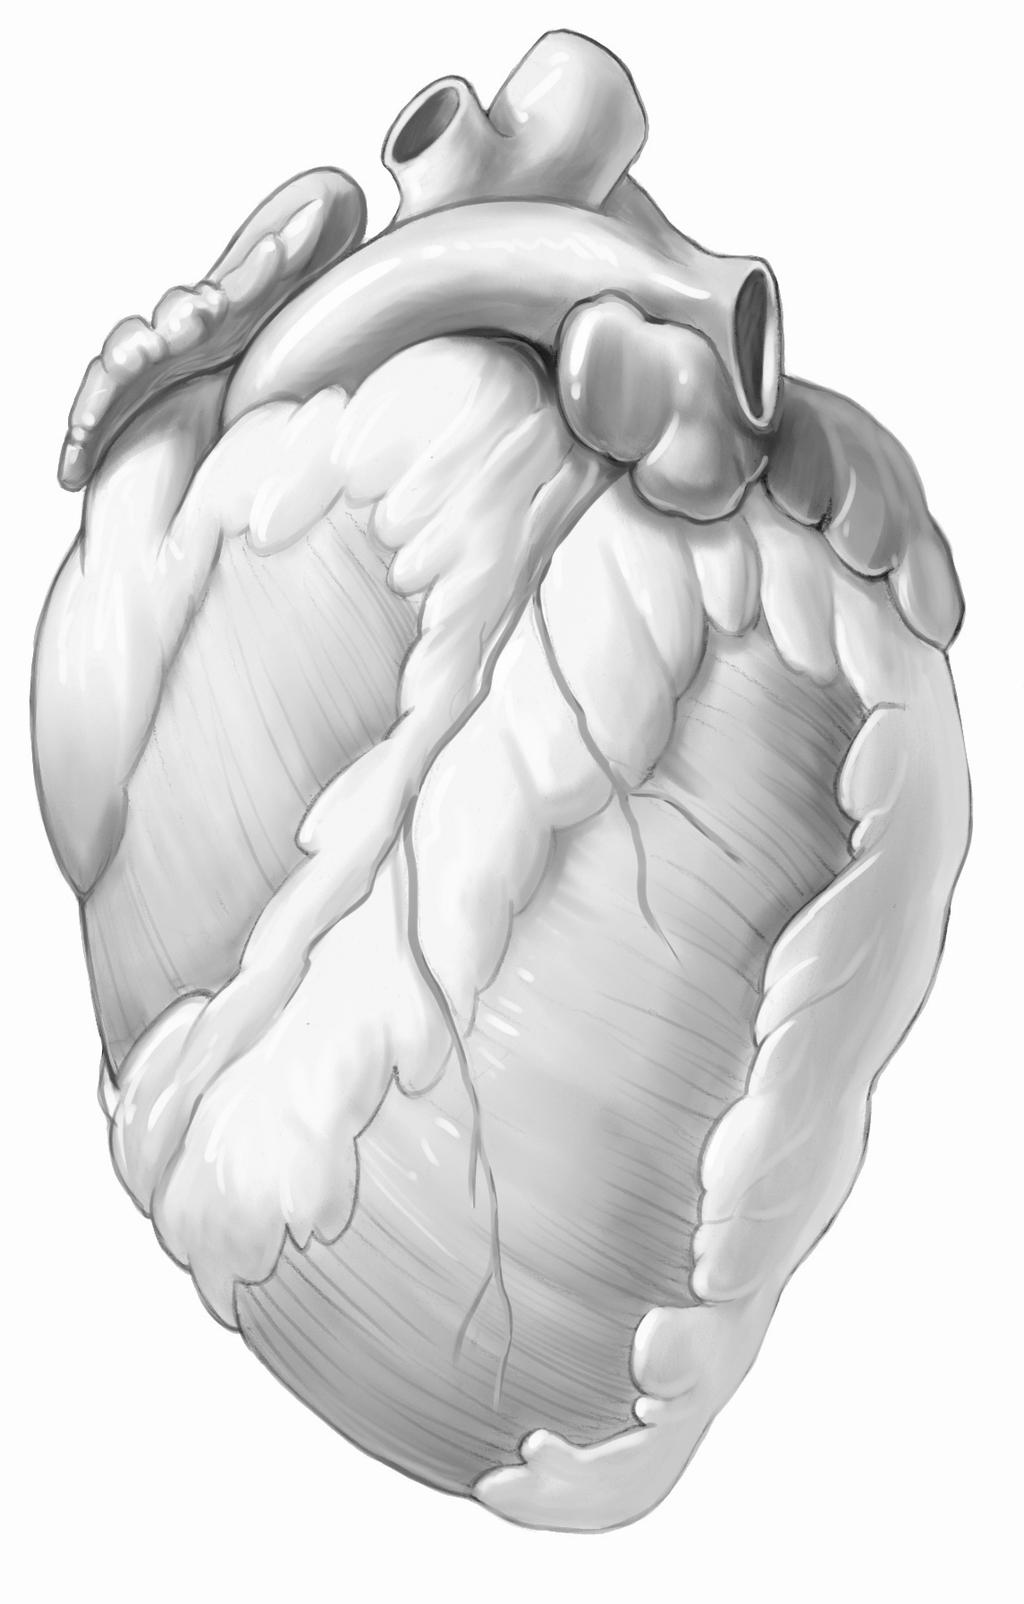 CHAPTER 8 Investigation 8.A: Identifying Structures of the Circulatory System Question: What features of a mammalian heart can you identify in a real or virtual heart?